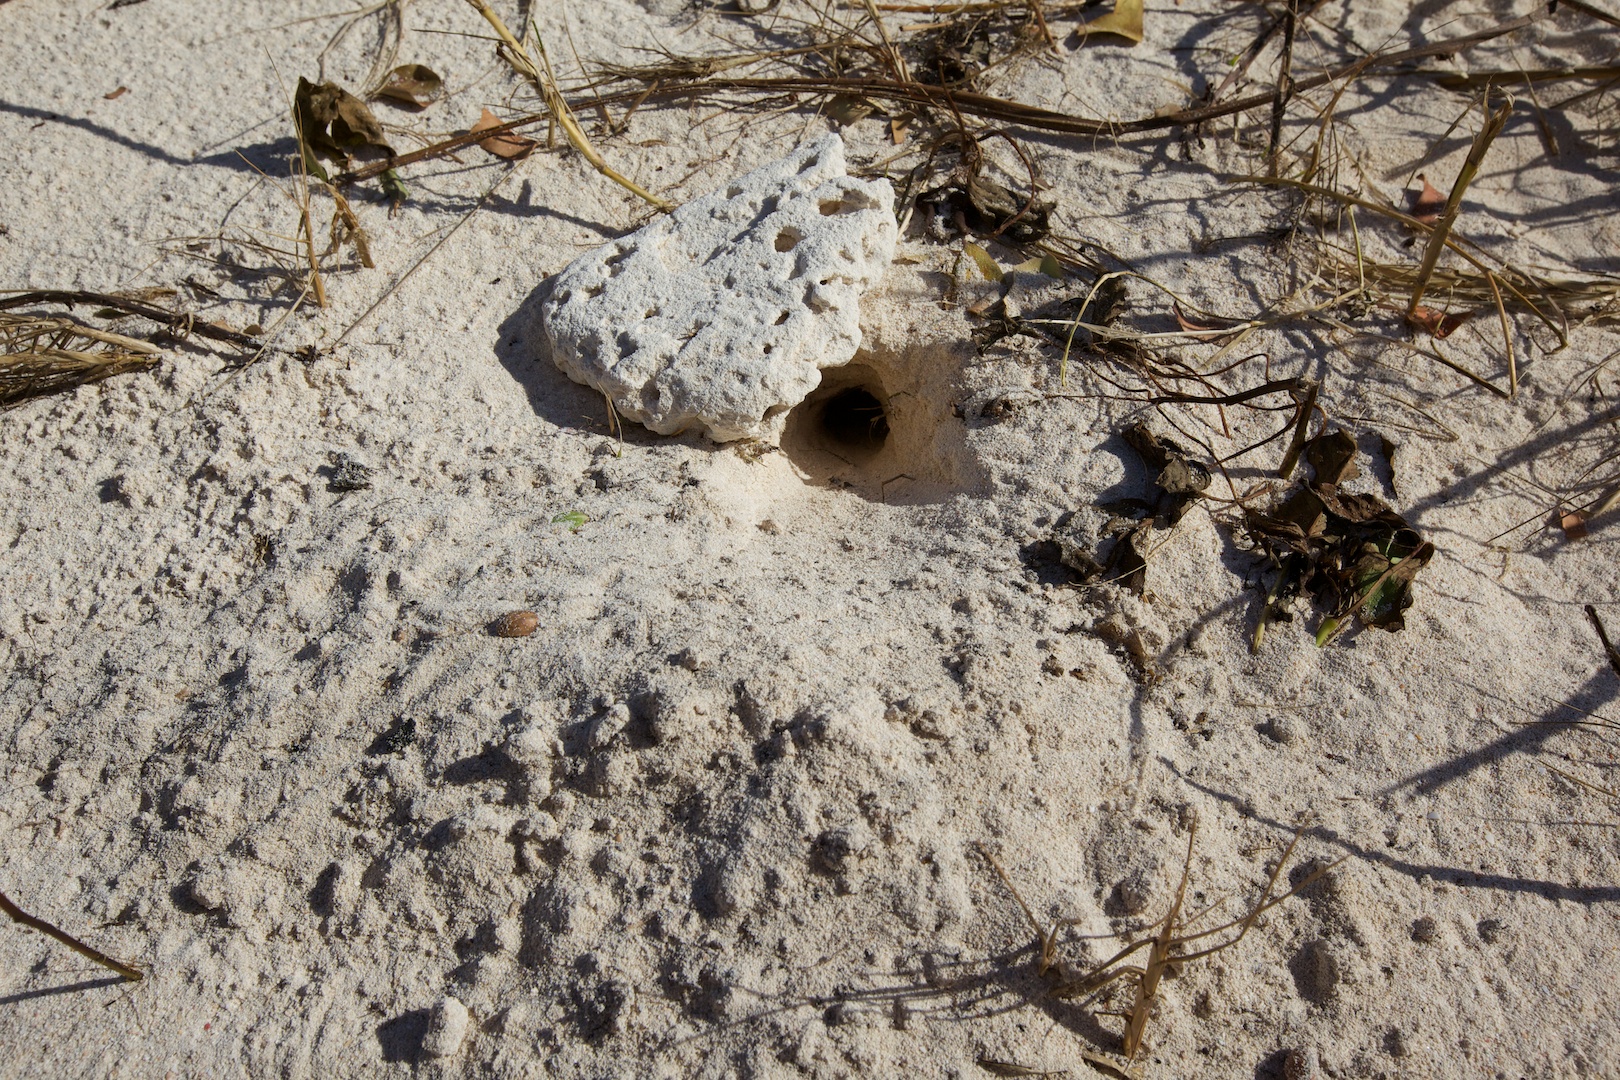  ghost crab made it through 